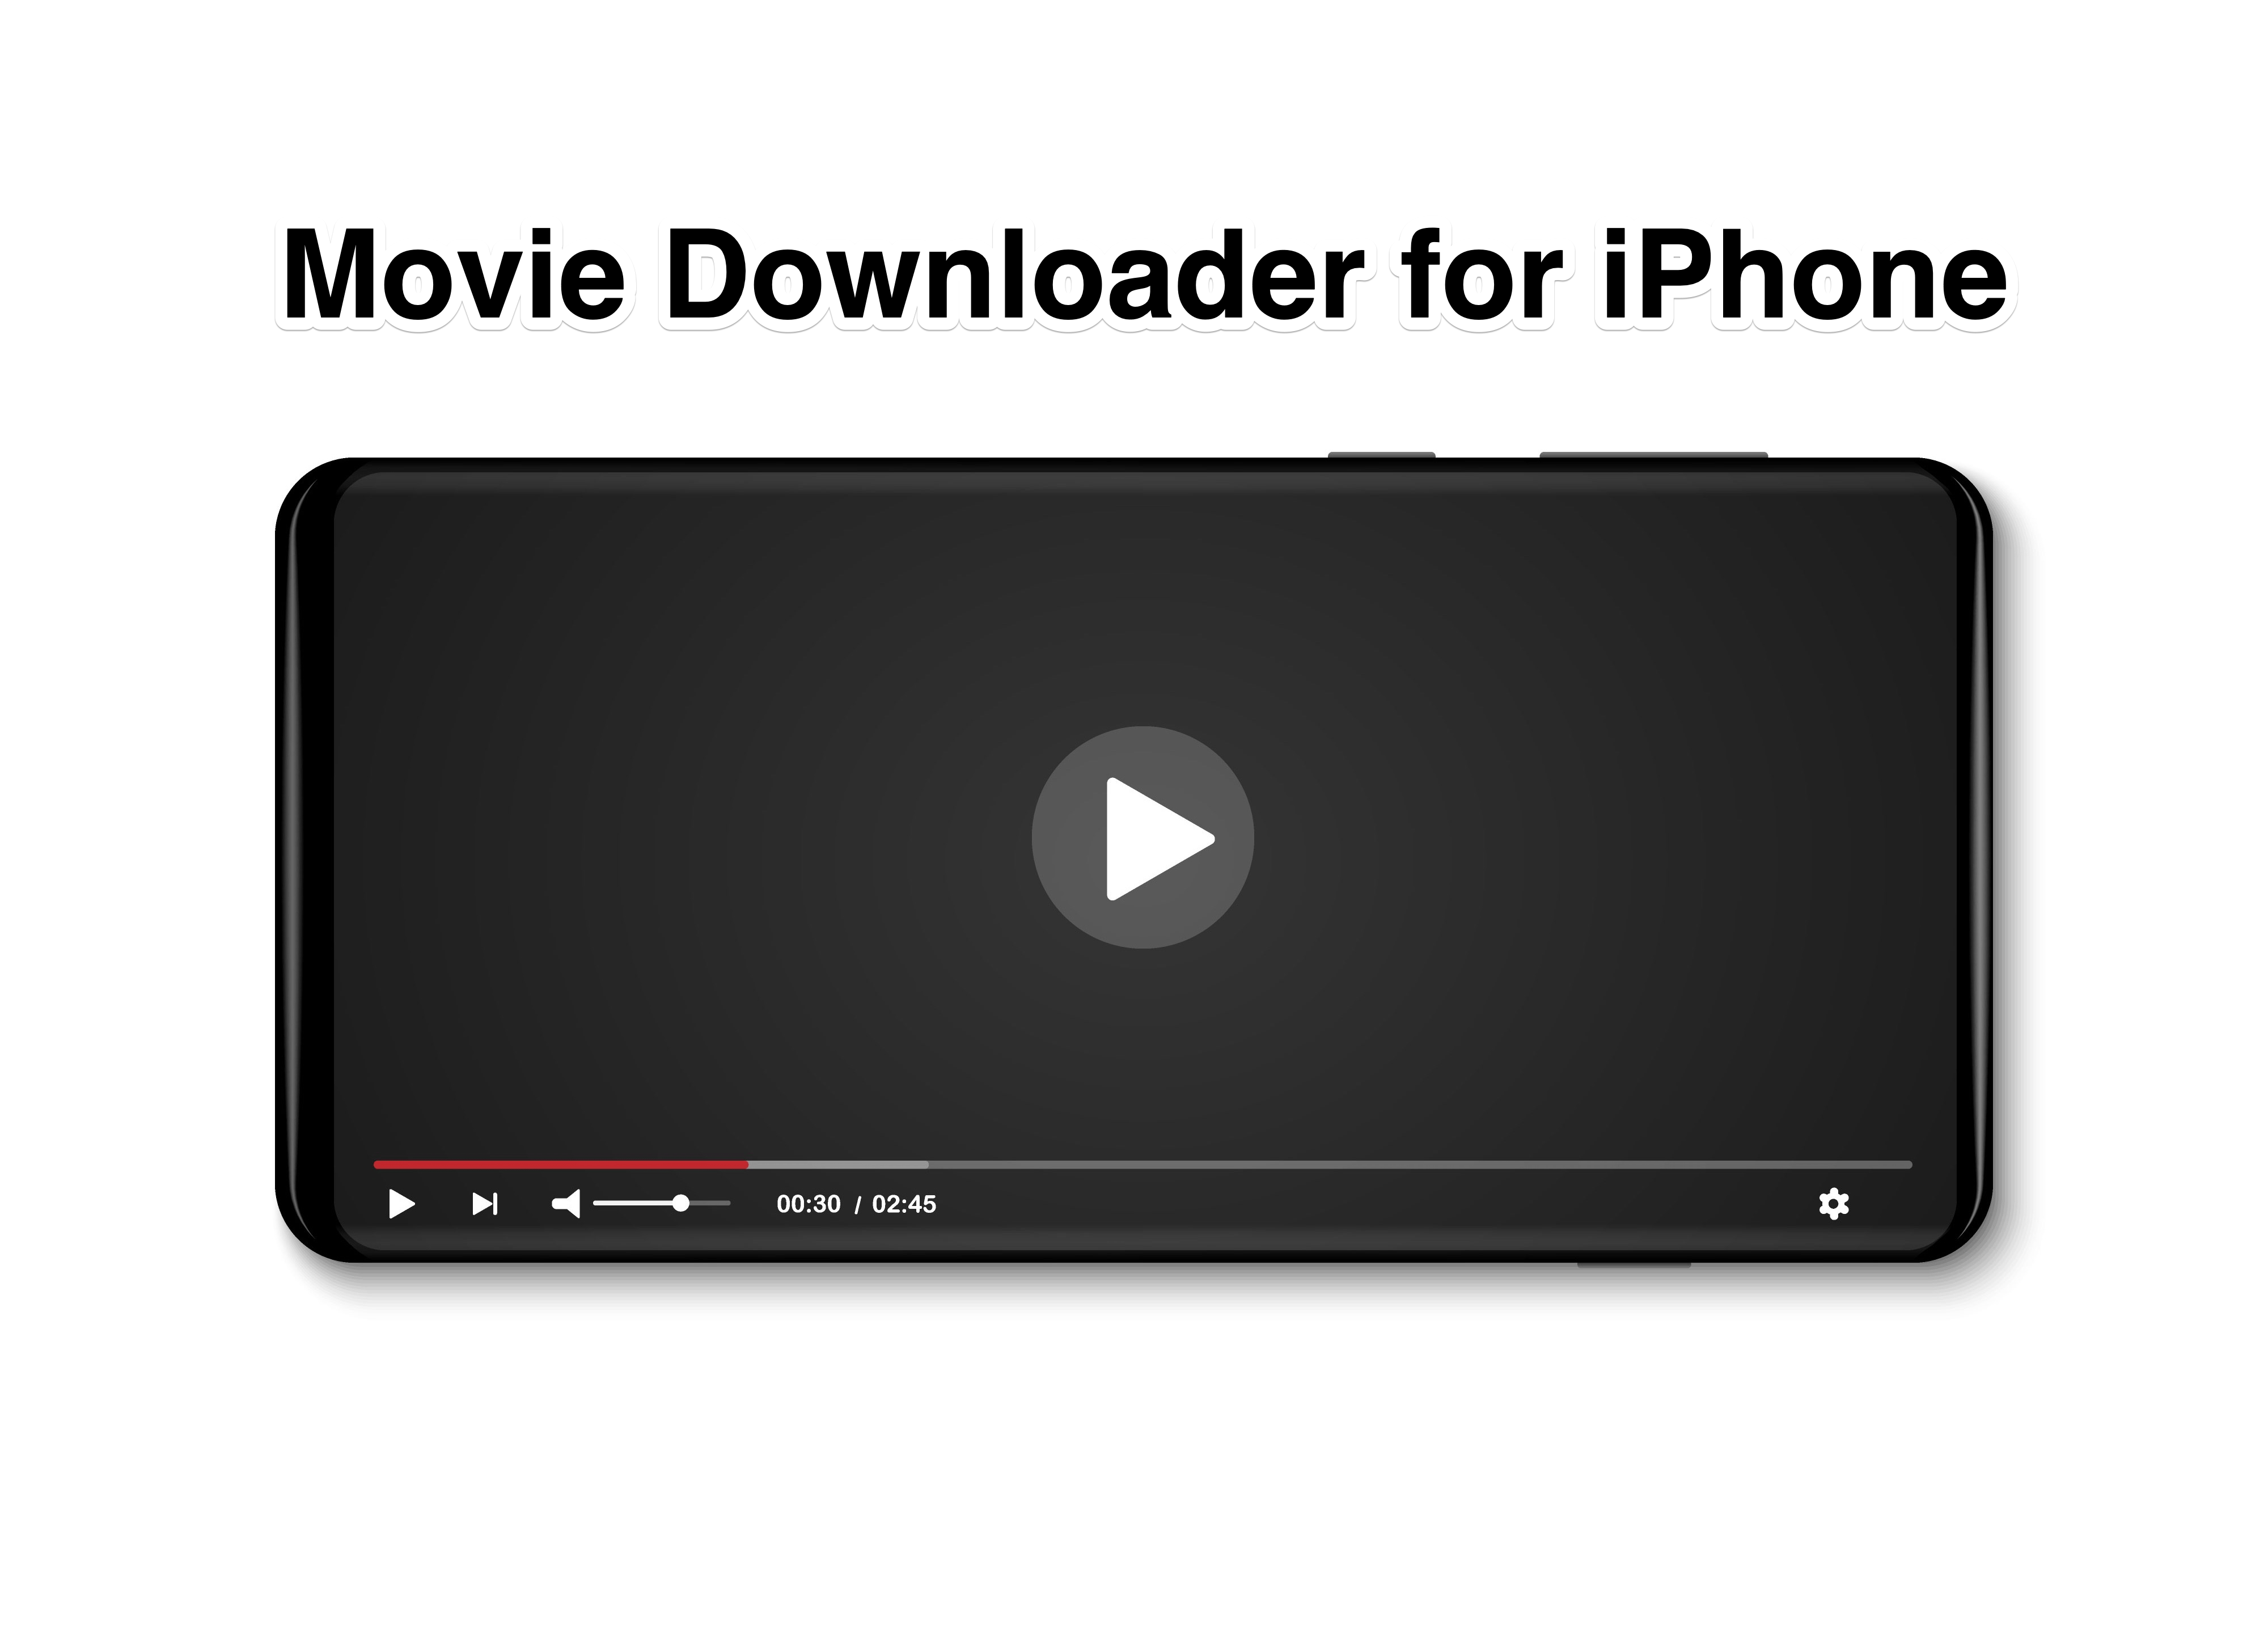 Download Movie on iPhone